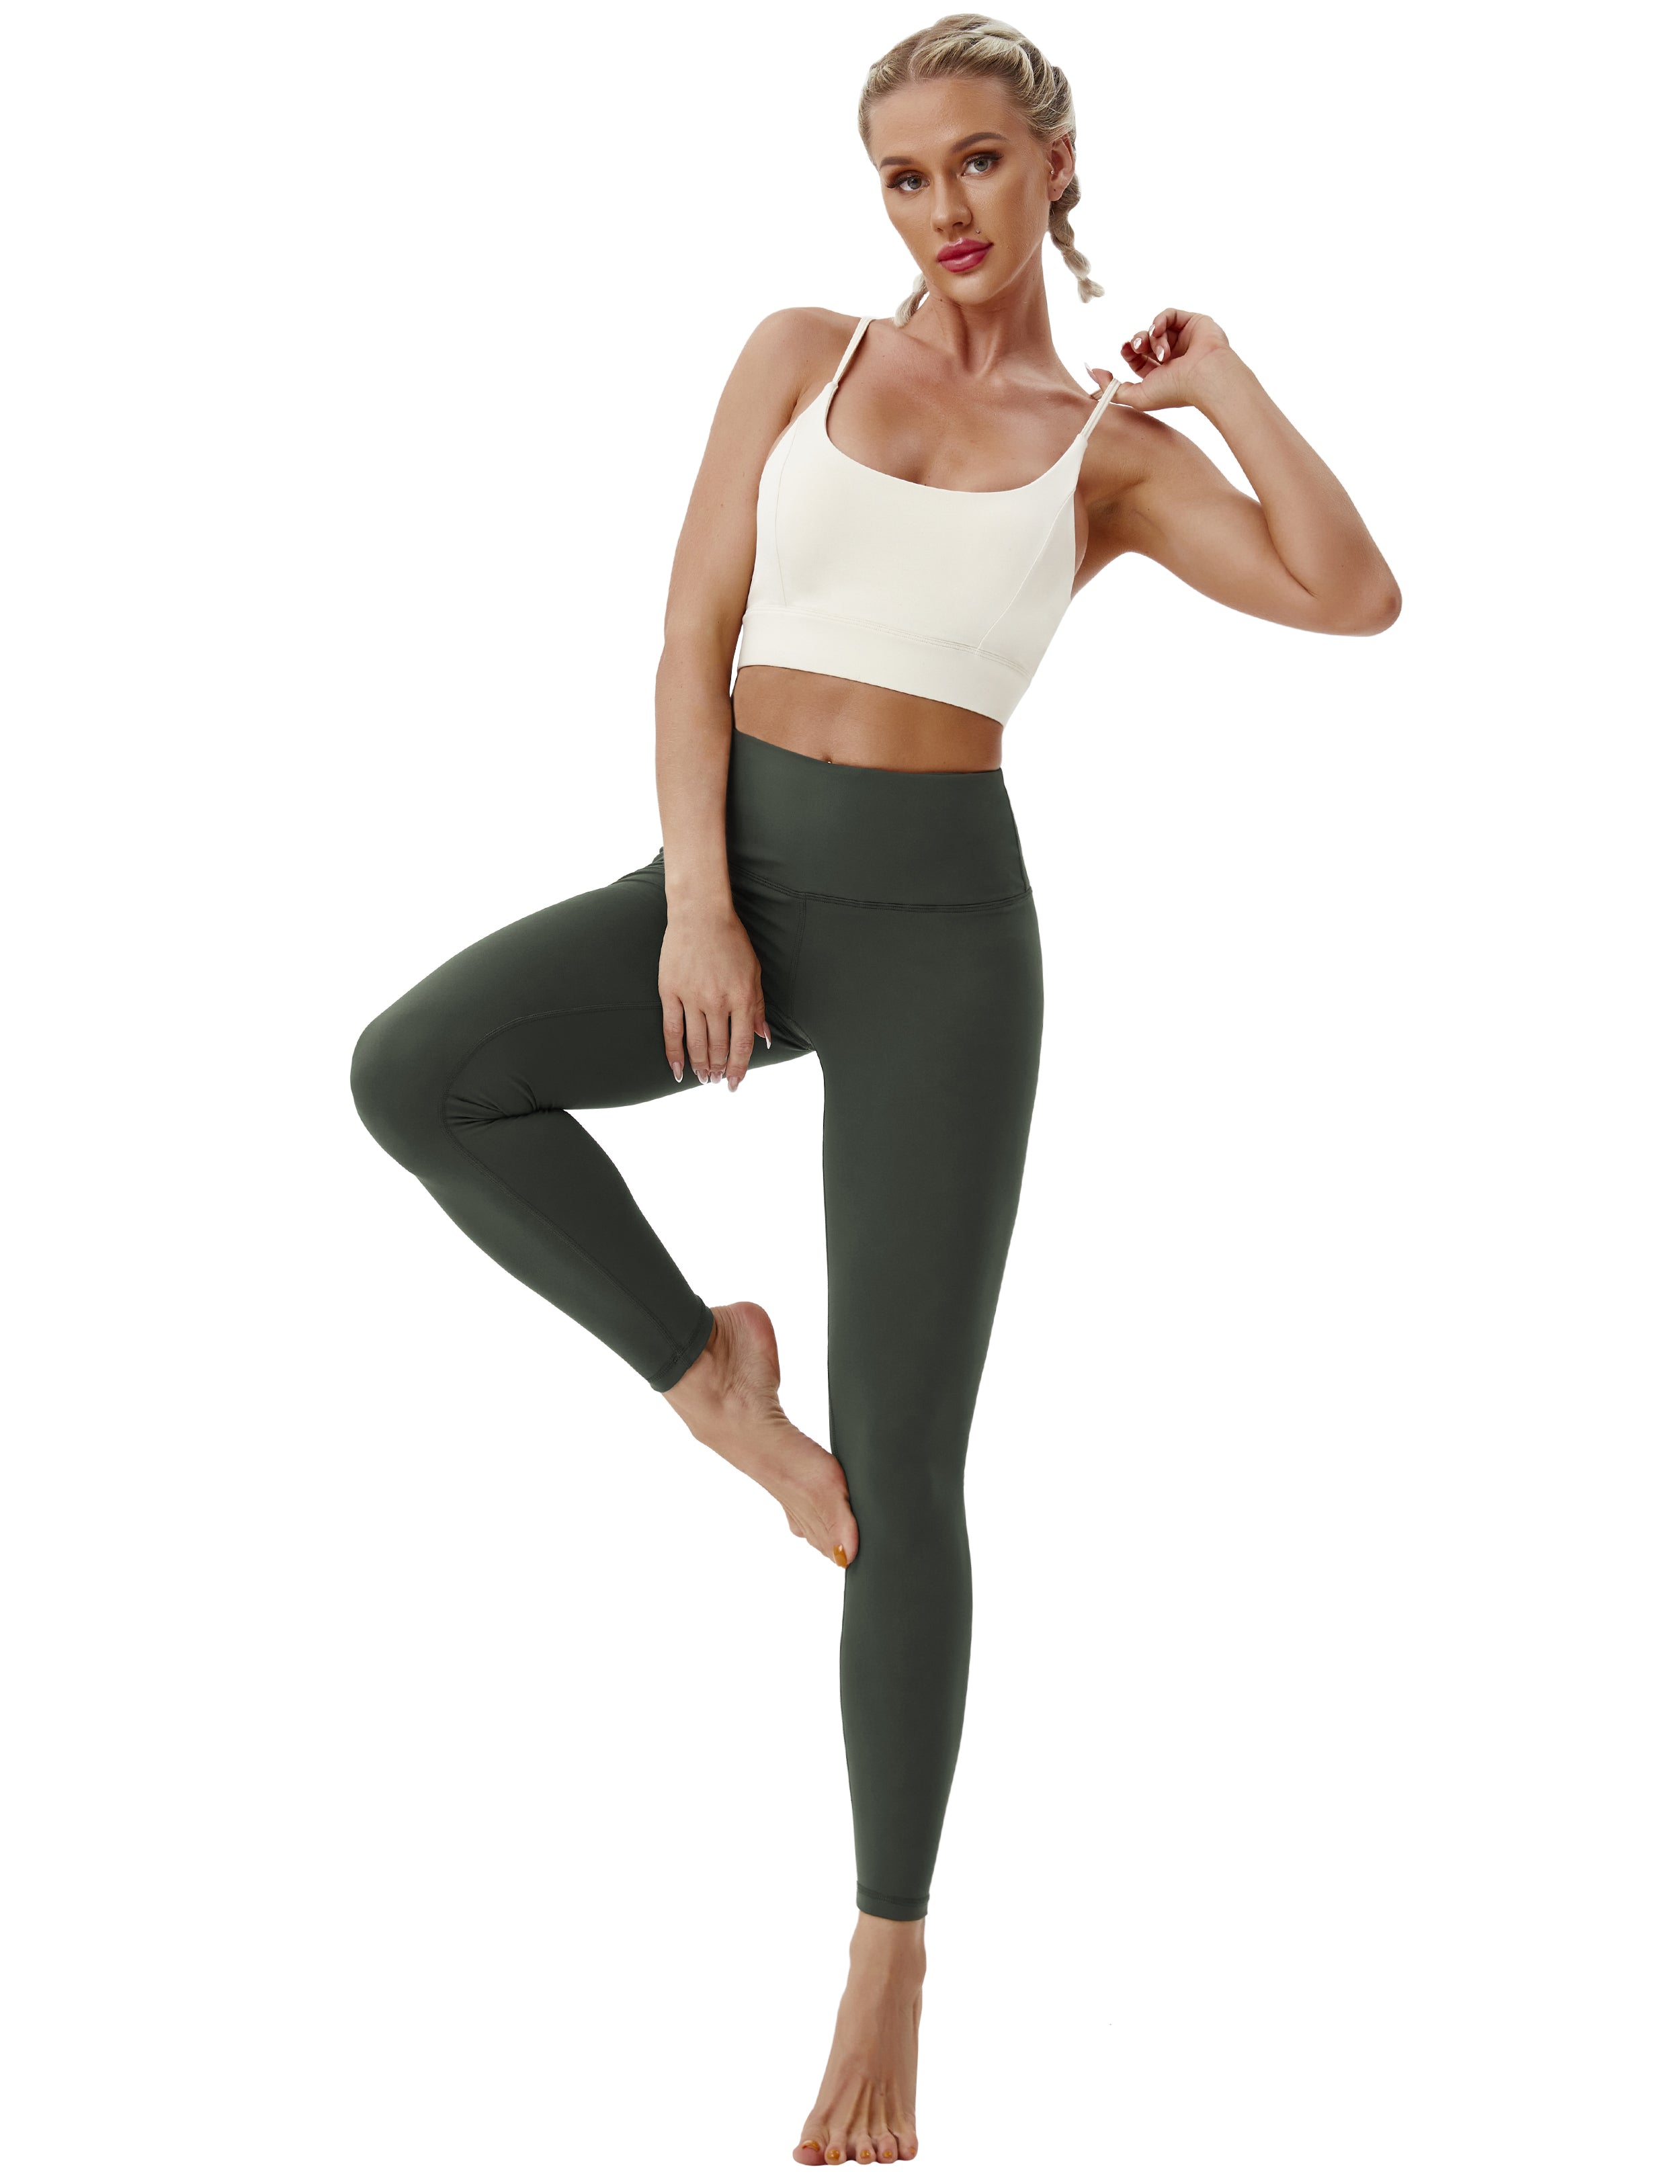 High Waist Yoga Pants olivegray 75%Nylon/25%Spandex Fabric doesn't attract lint easily 4-way stretch No see-through Moisture-wicking Tummy control Inner pocket Four lengths